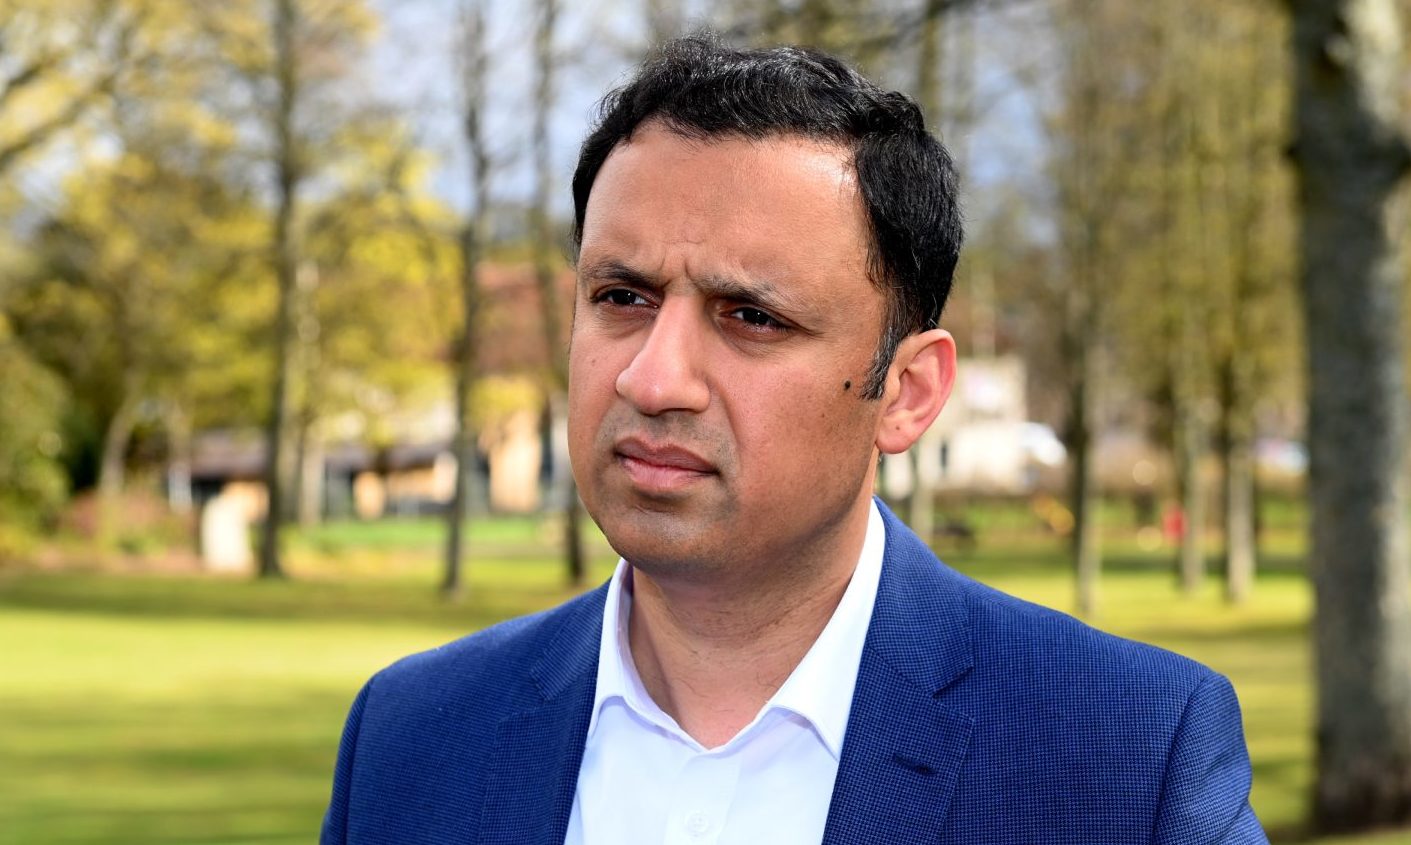 Scottish Labour leader Anas Sarwar spoke out in support of the Aberdeen Nine on a visit to the city's Victoria Park last month.